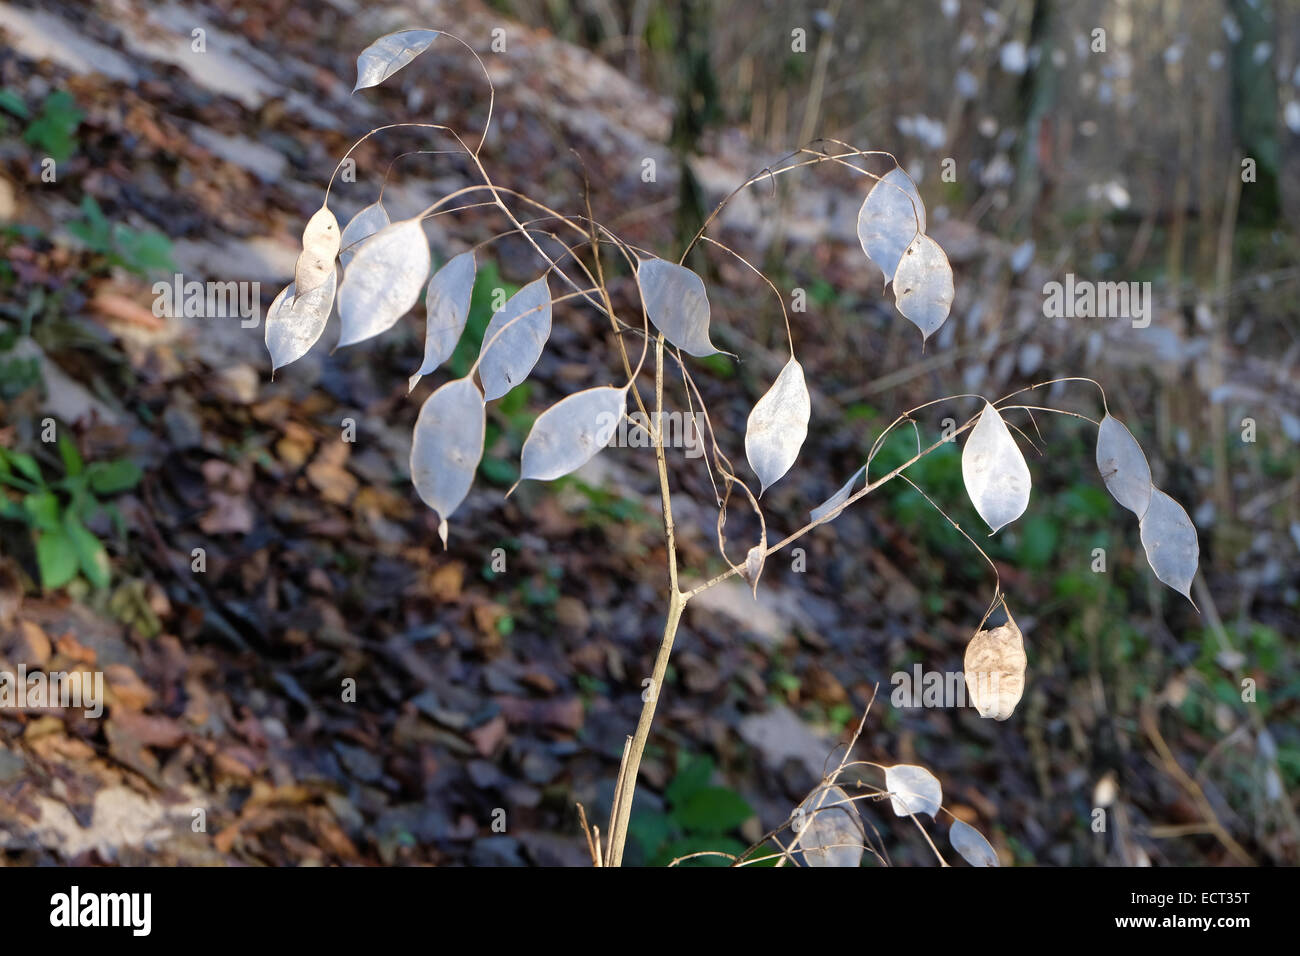 Lunaria, honesty flowering plant in the forest Stock Photo